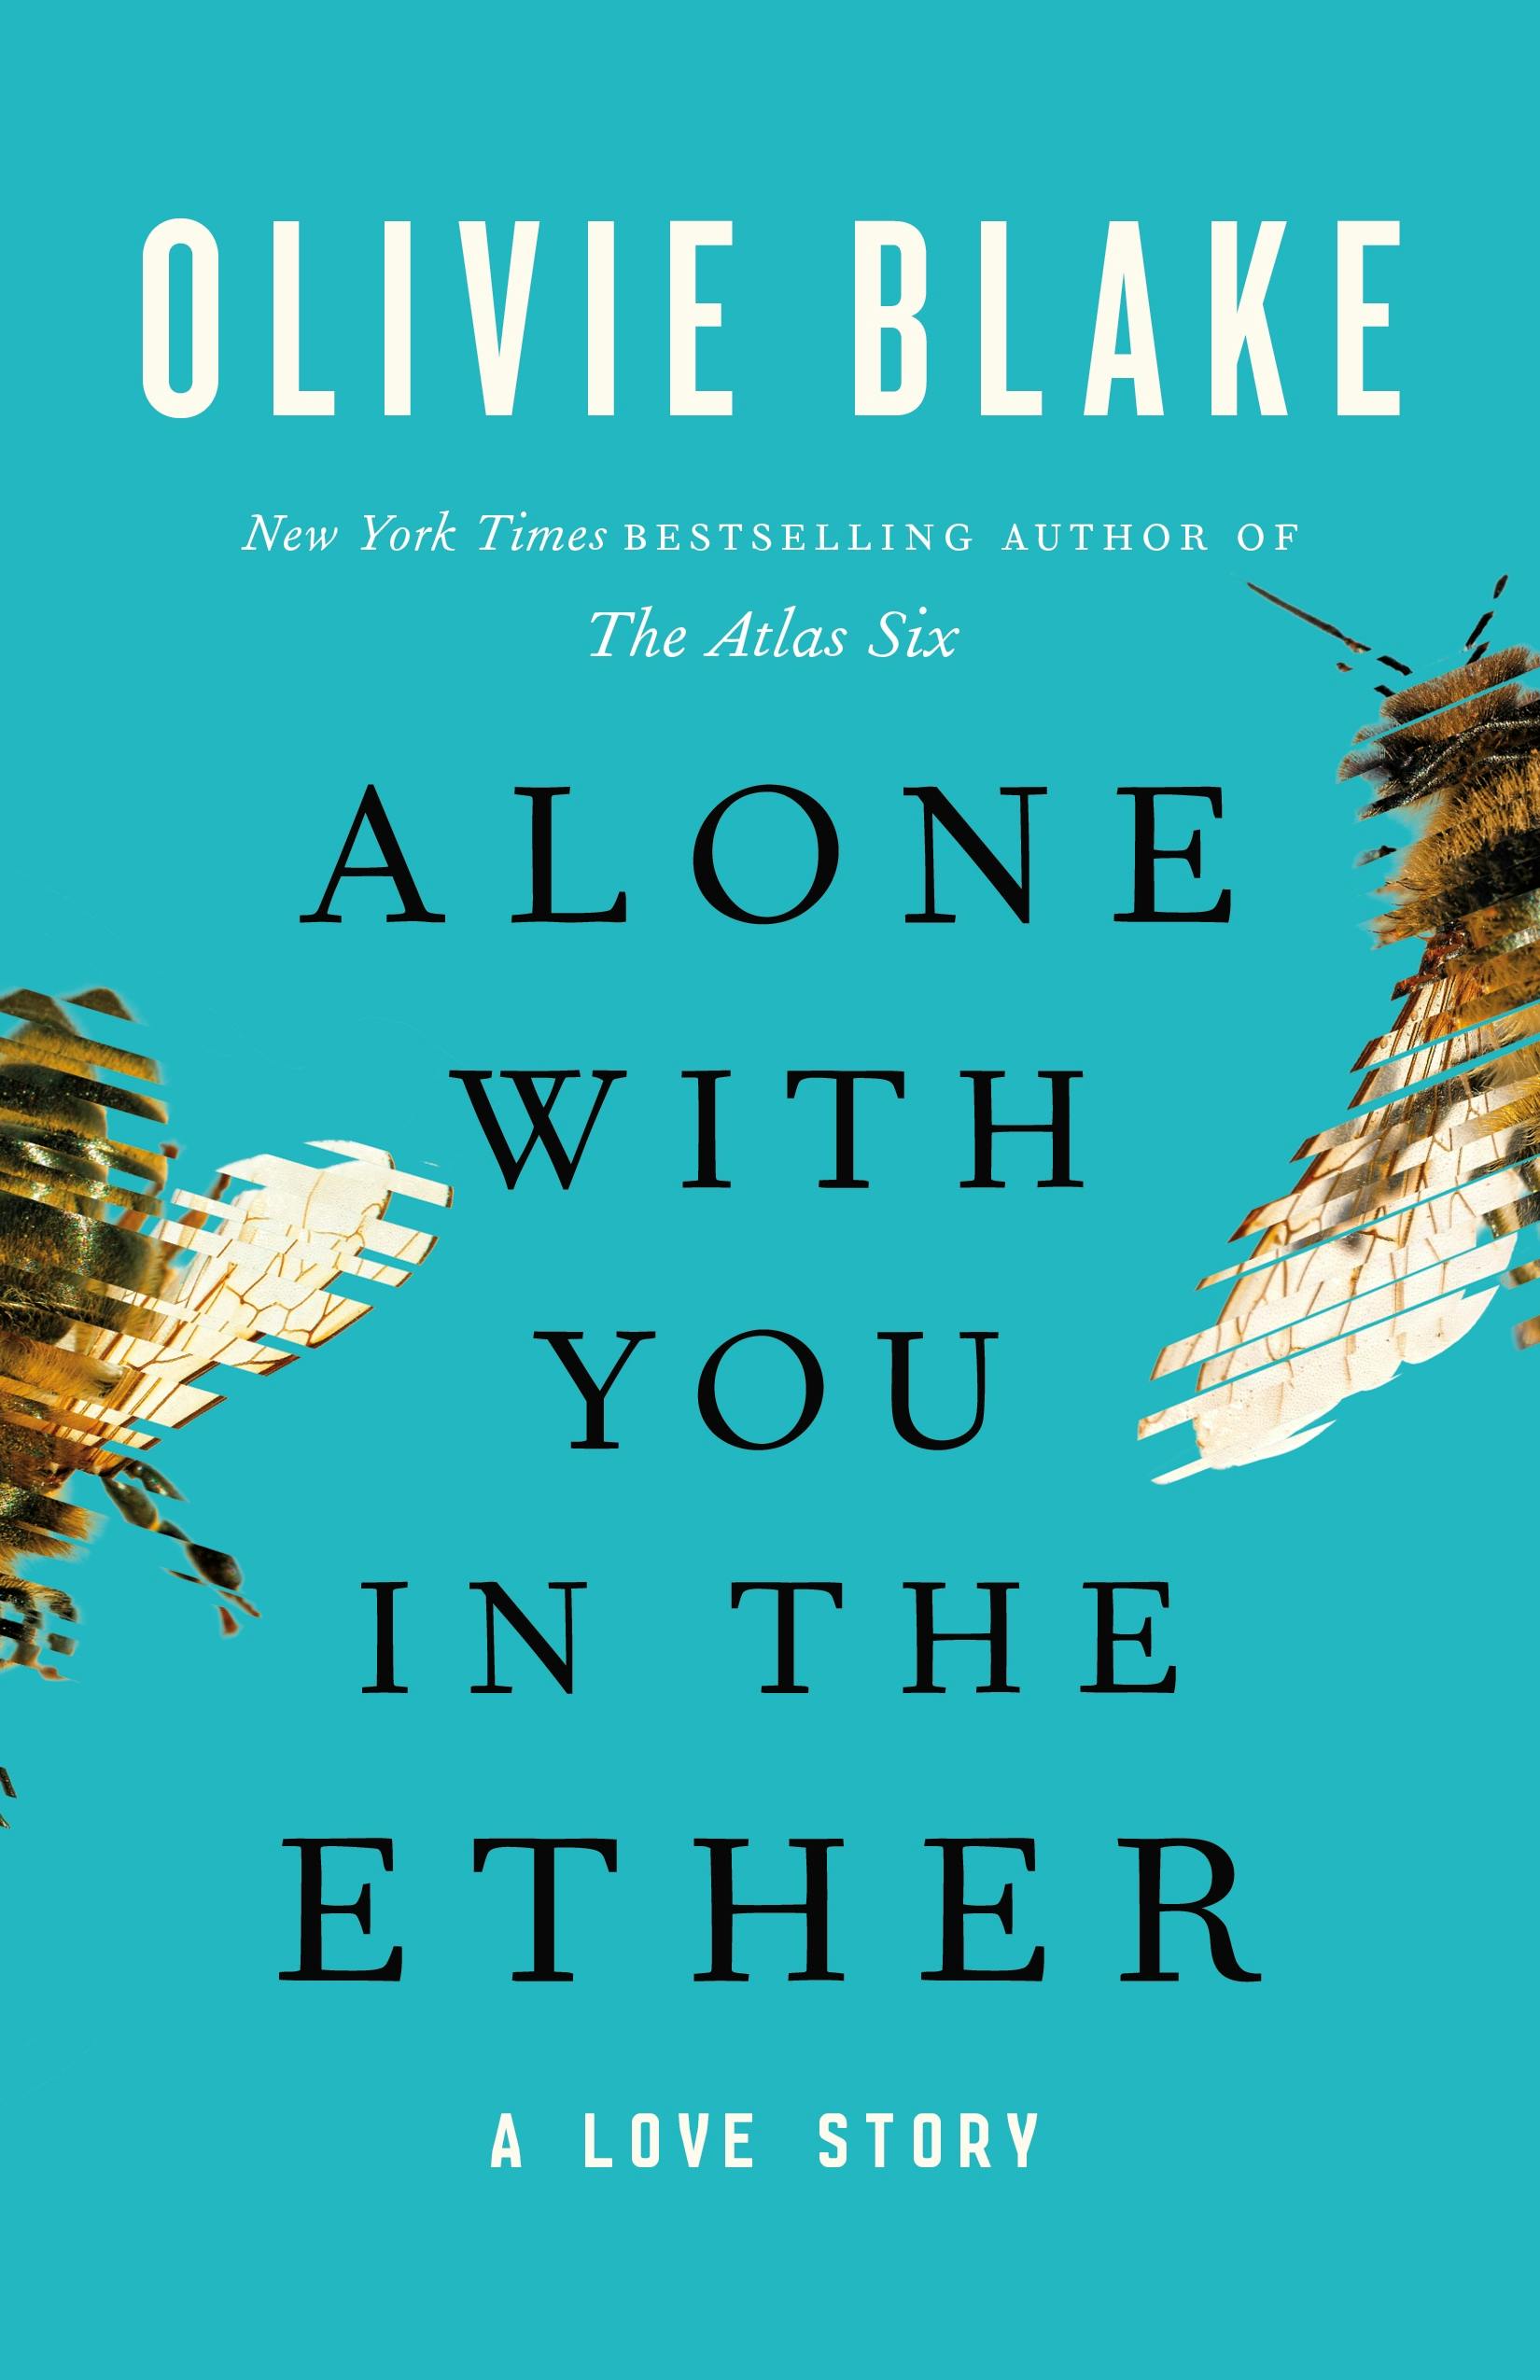 Cover for the book titled as: Alone with You in the Ether